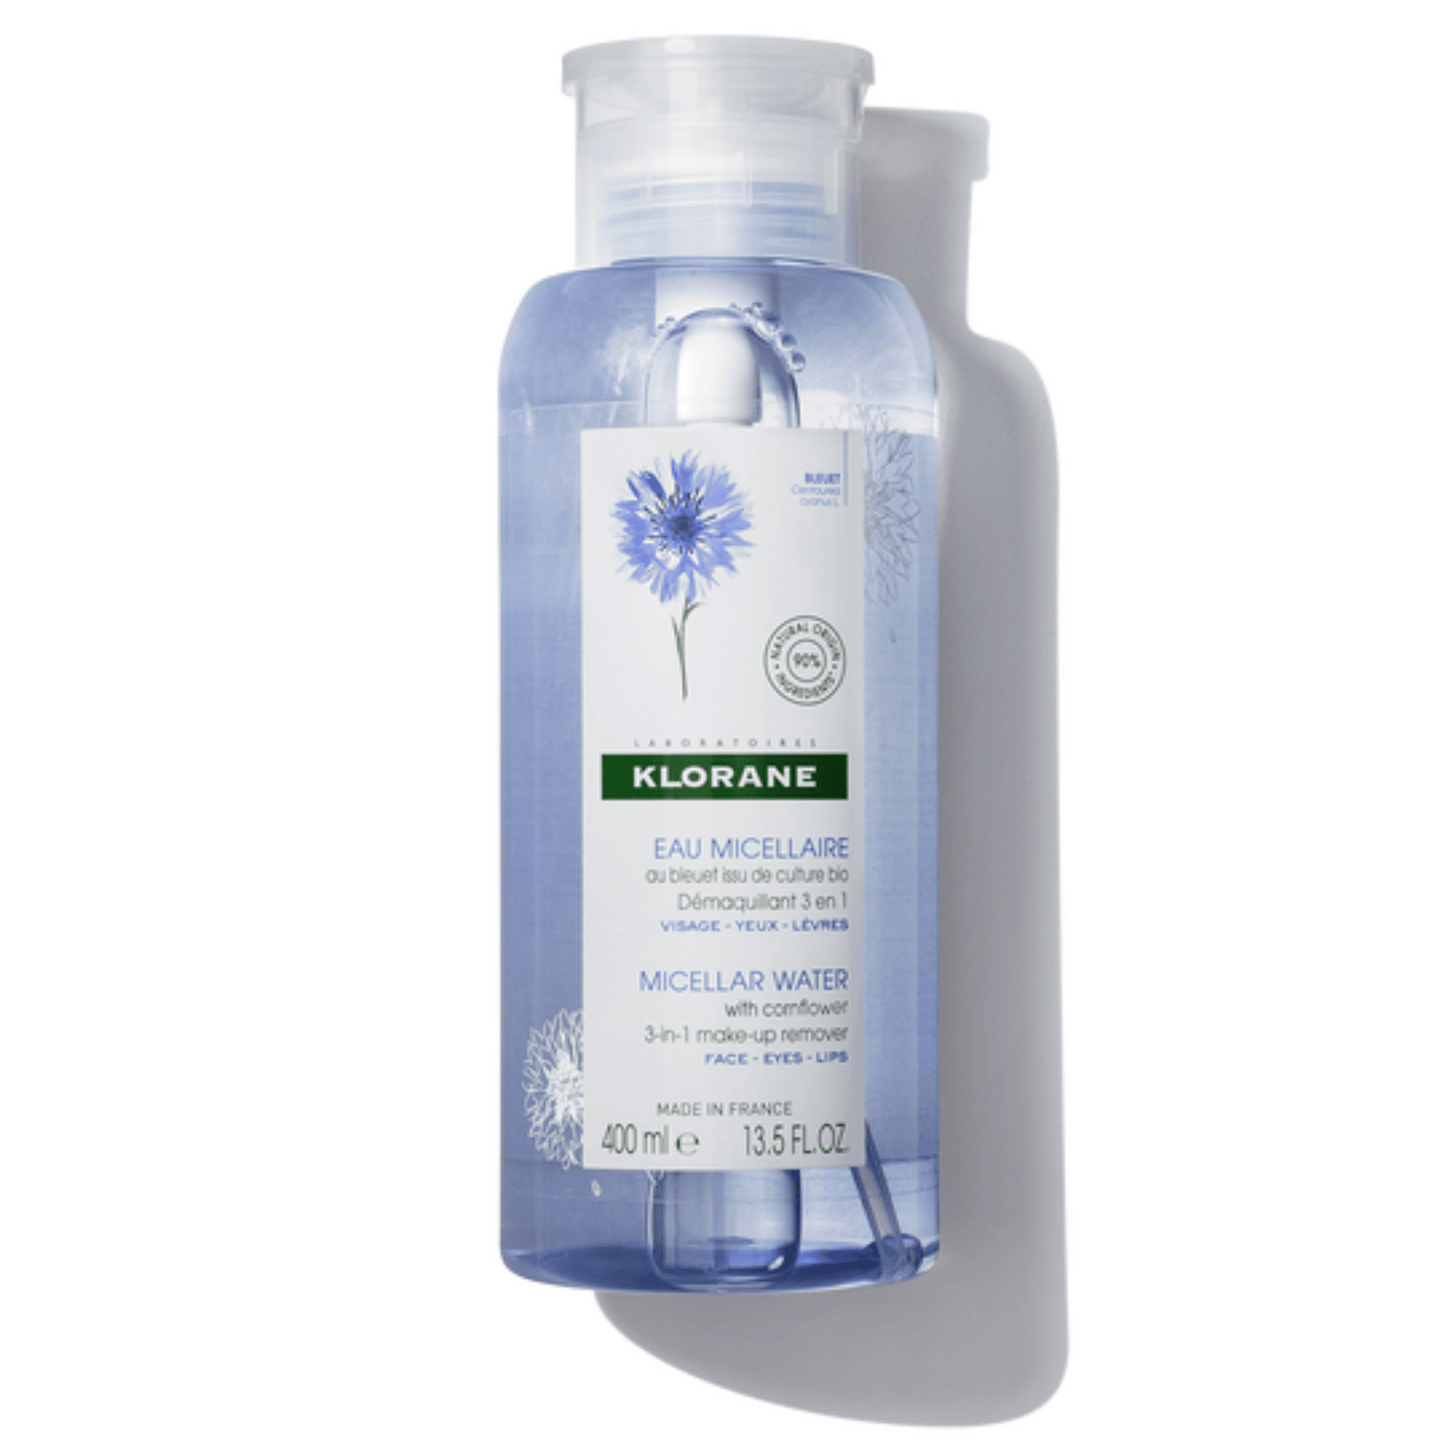 Primary Image of Micellar Water with Organically Farmed Cornflower Water